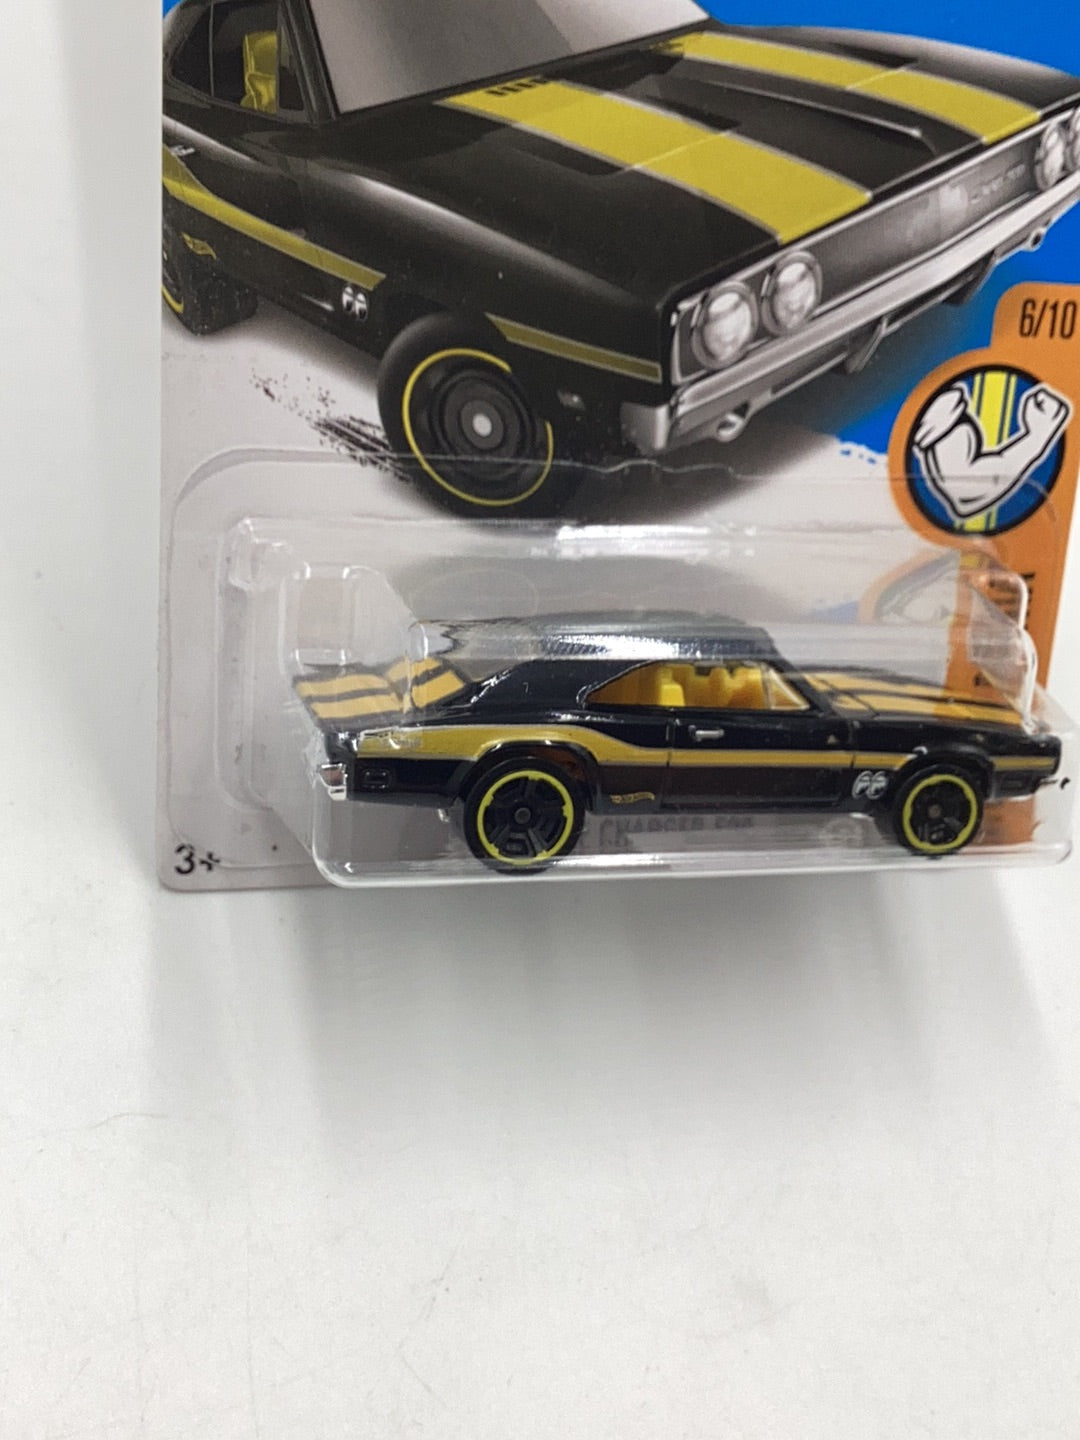 2017 Hot Wheels Muscle Mania #285 69 Dodge Charger 500 57D